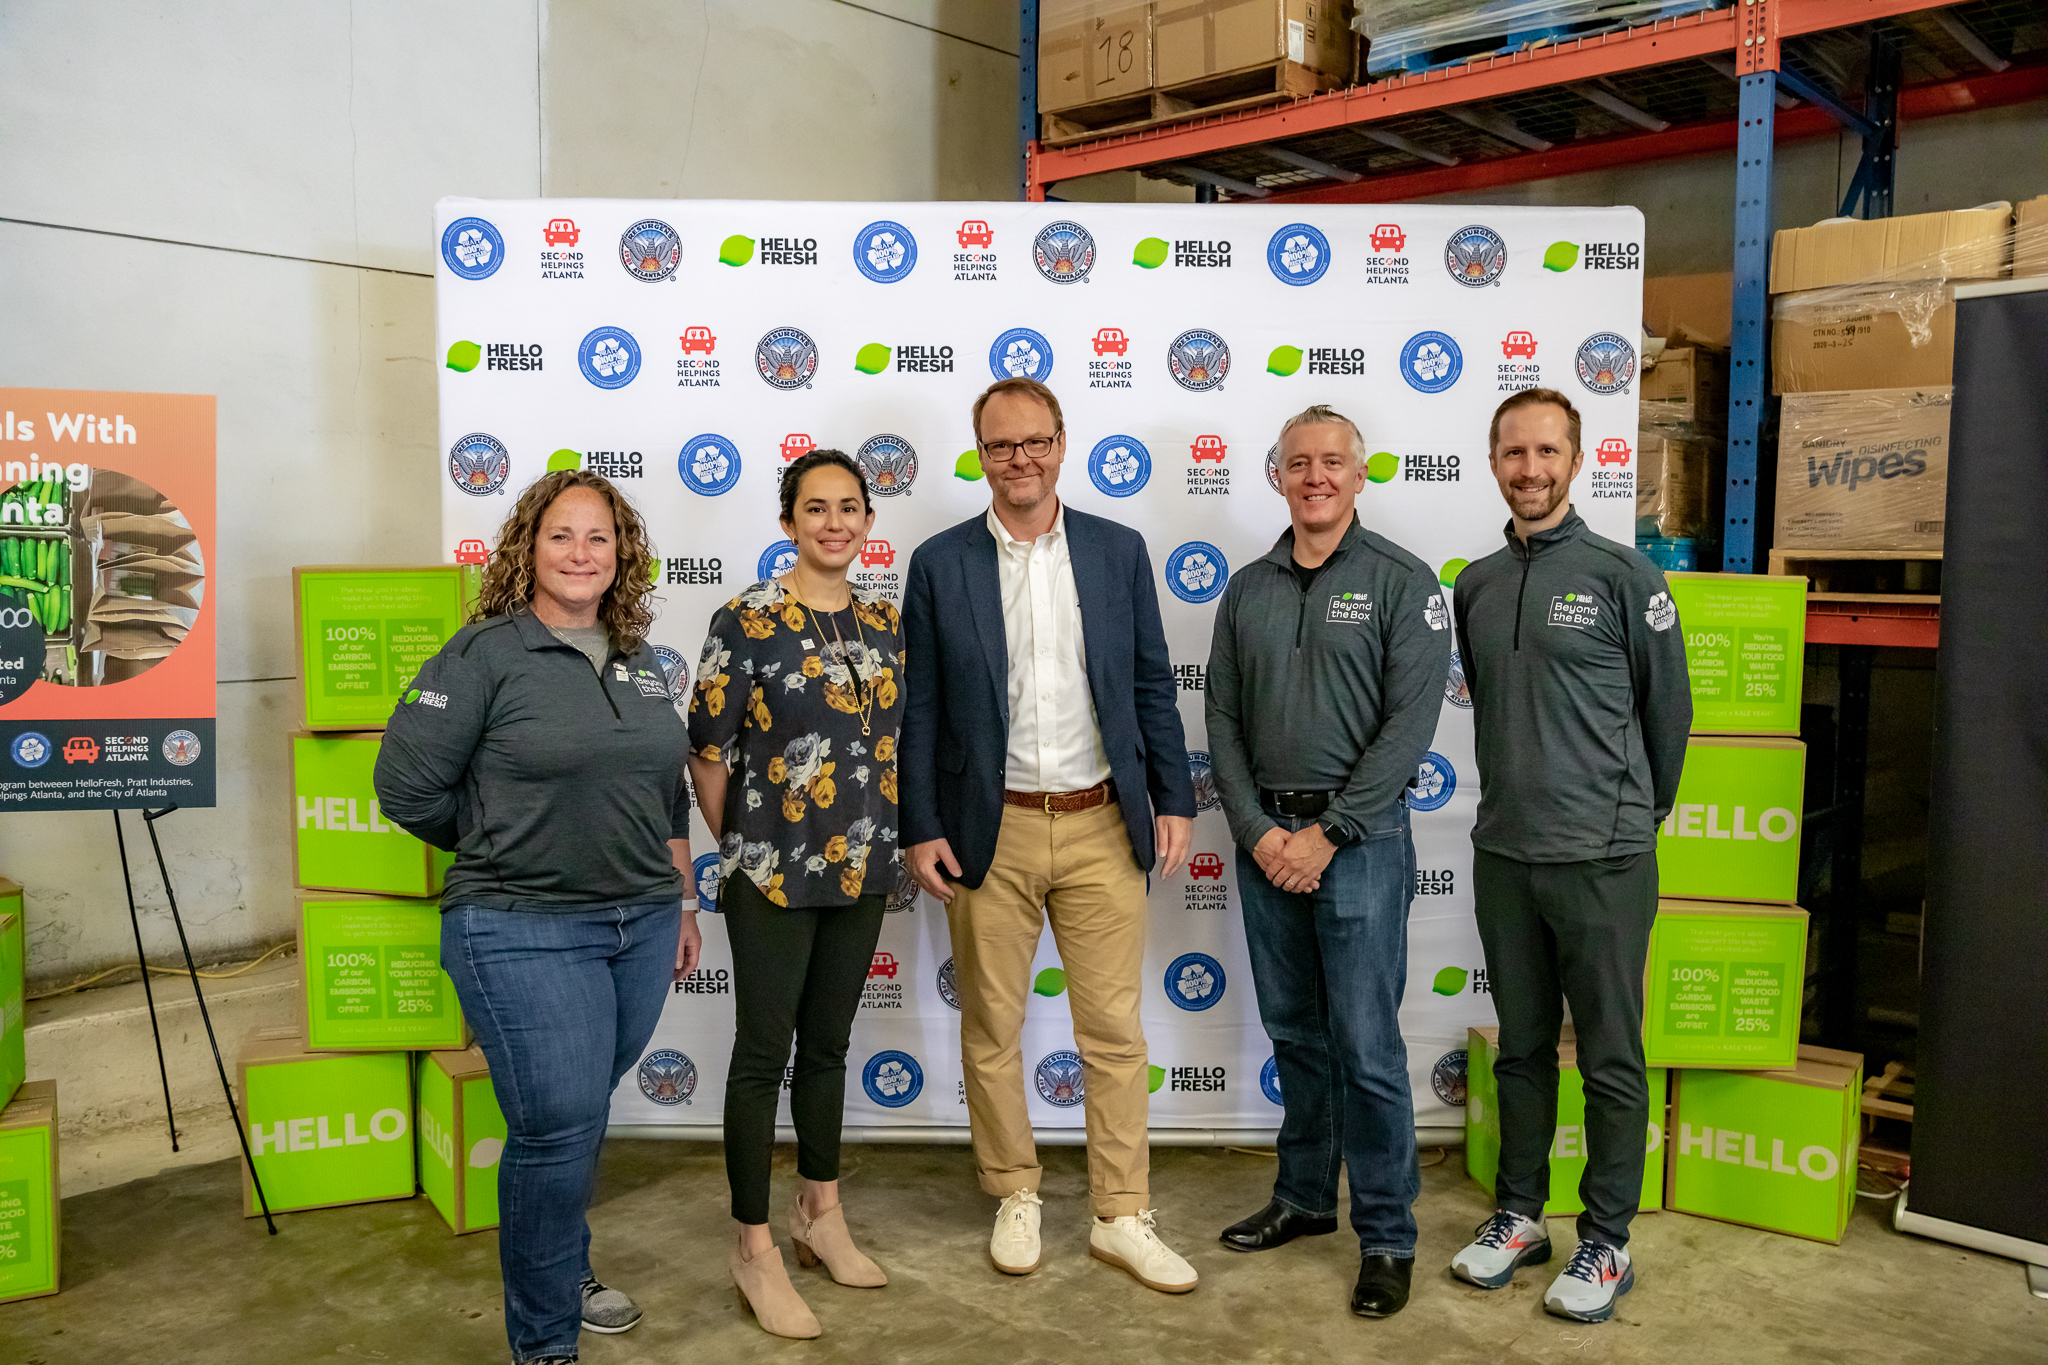 Jeff and HelloFresh leaders at an event with Second Helpings Atlanta.